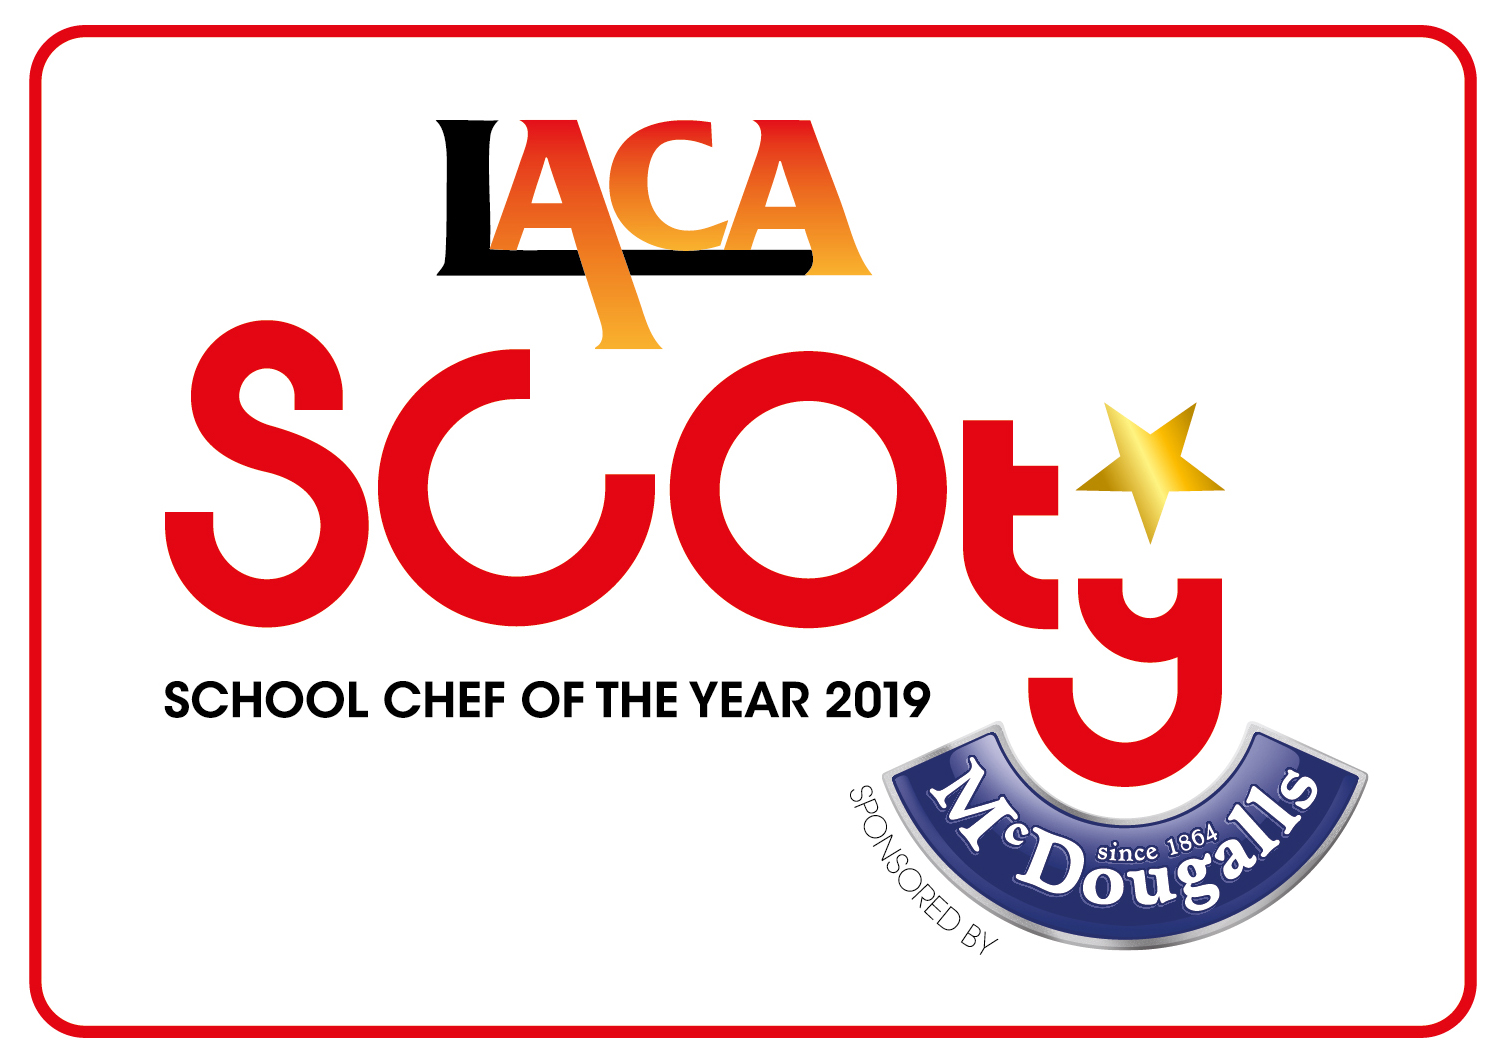 LACA (Lead Association for Catering in Education) Award 2018